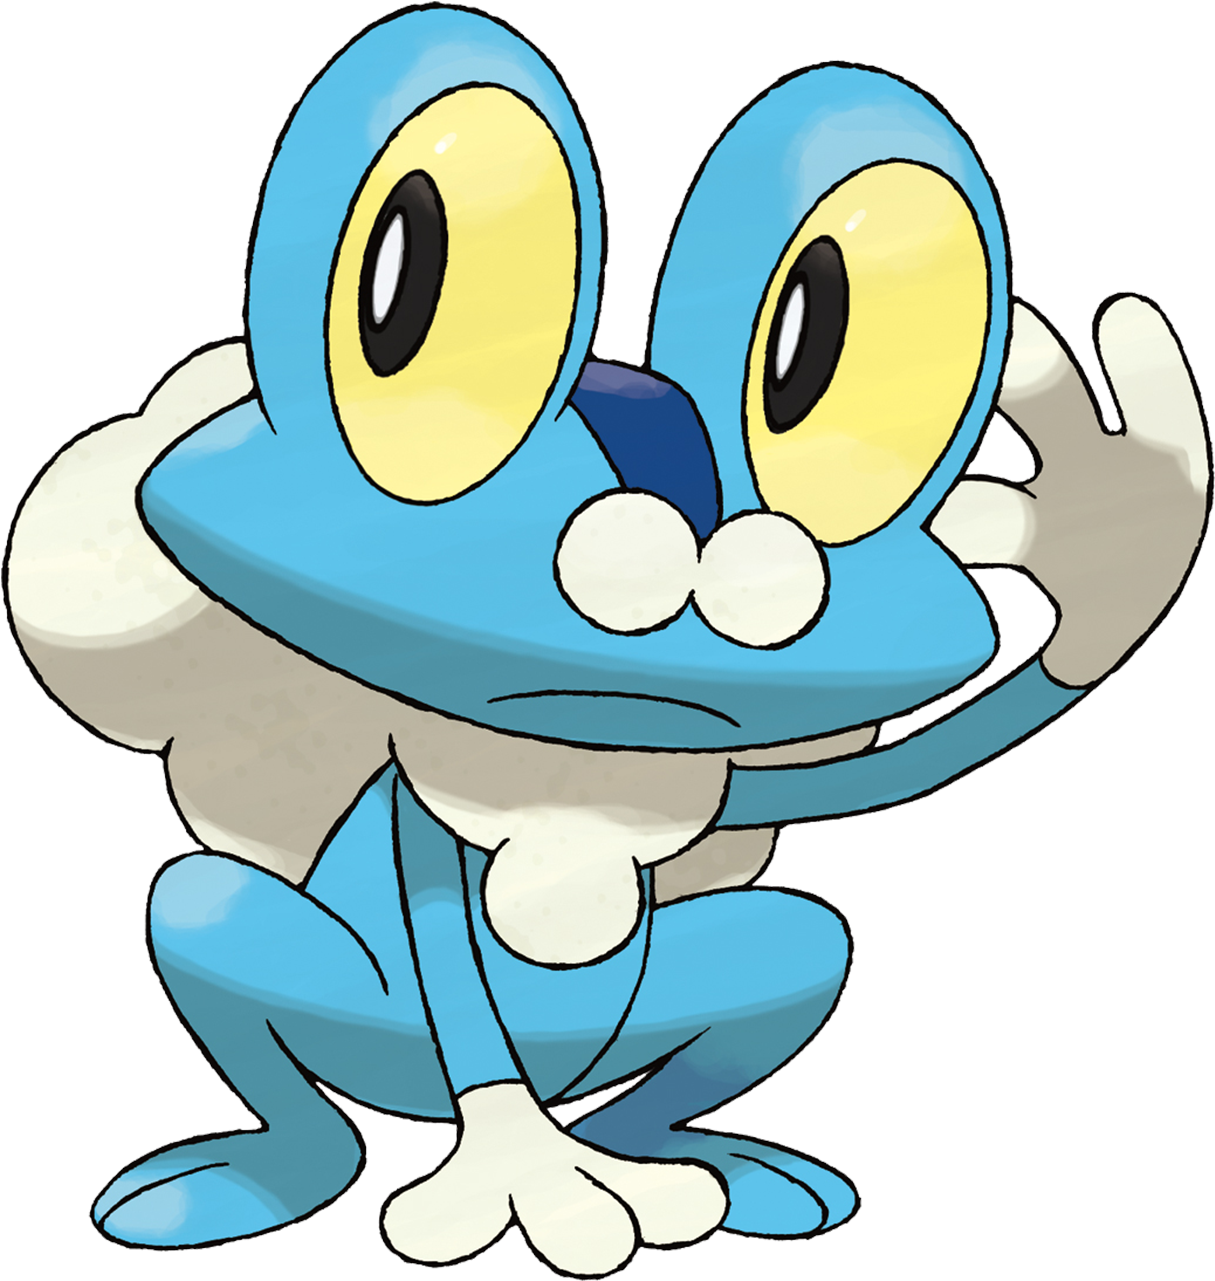 It Secretes Flexible Bubbles From Its Chest And Back - Pokemon Xy Tipo Agua (1280x1280)